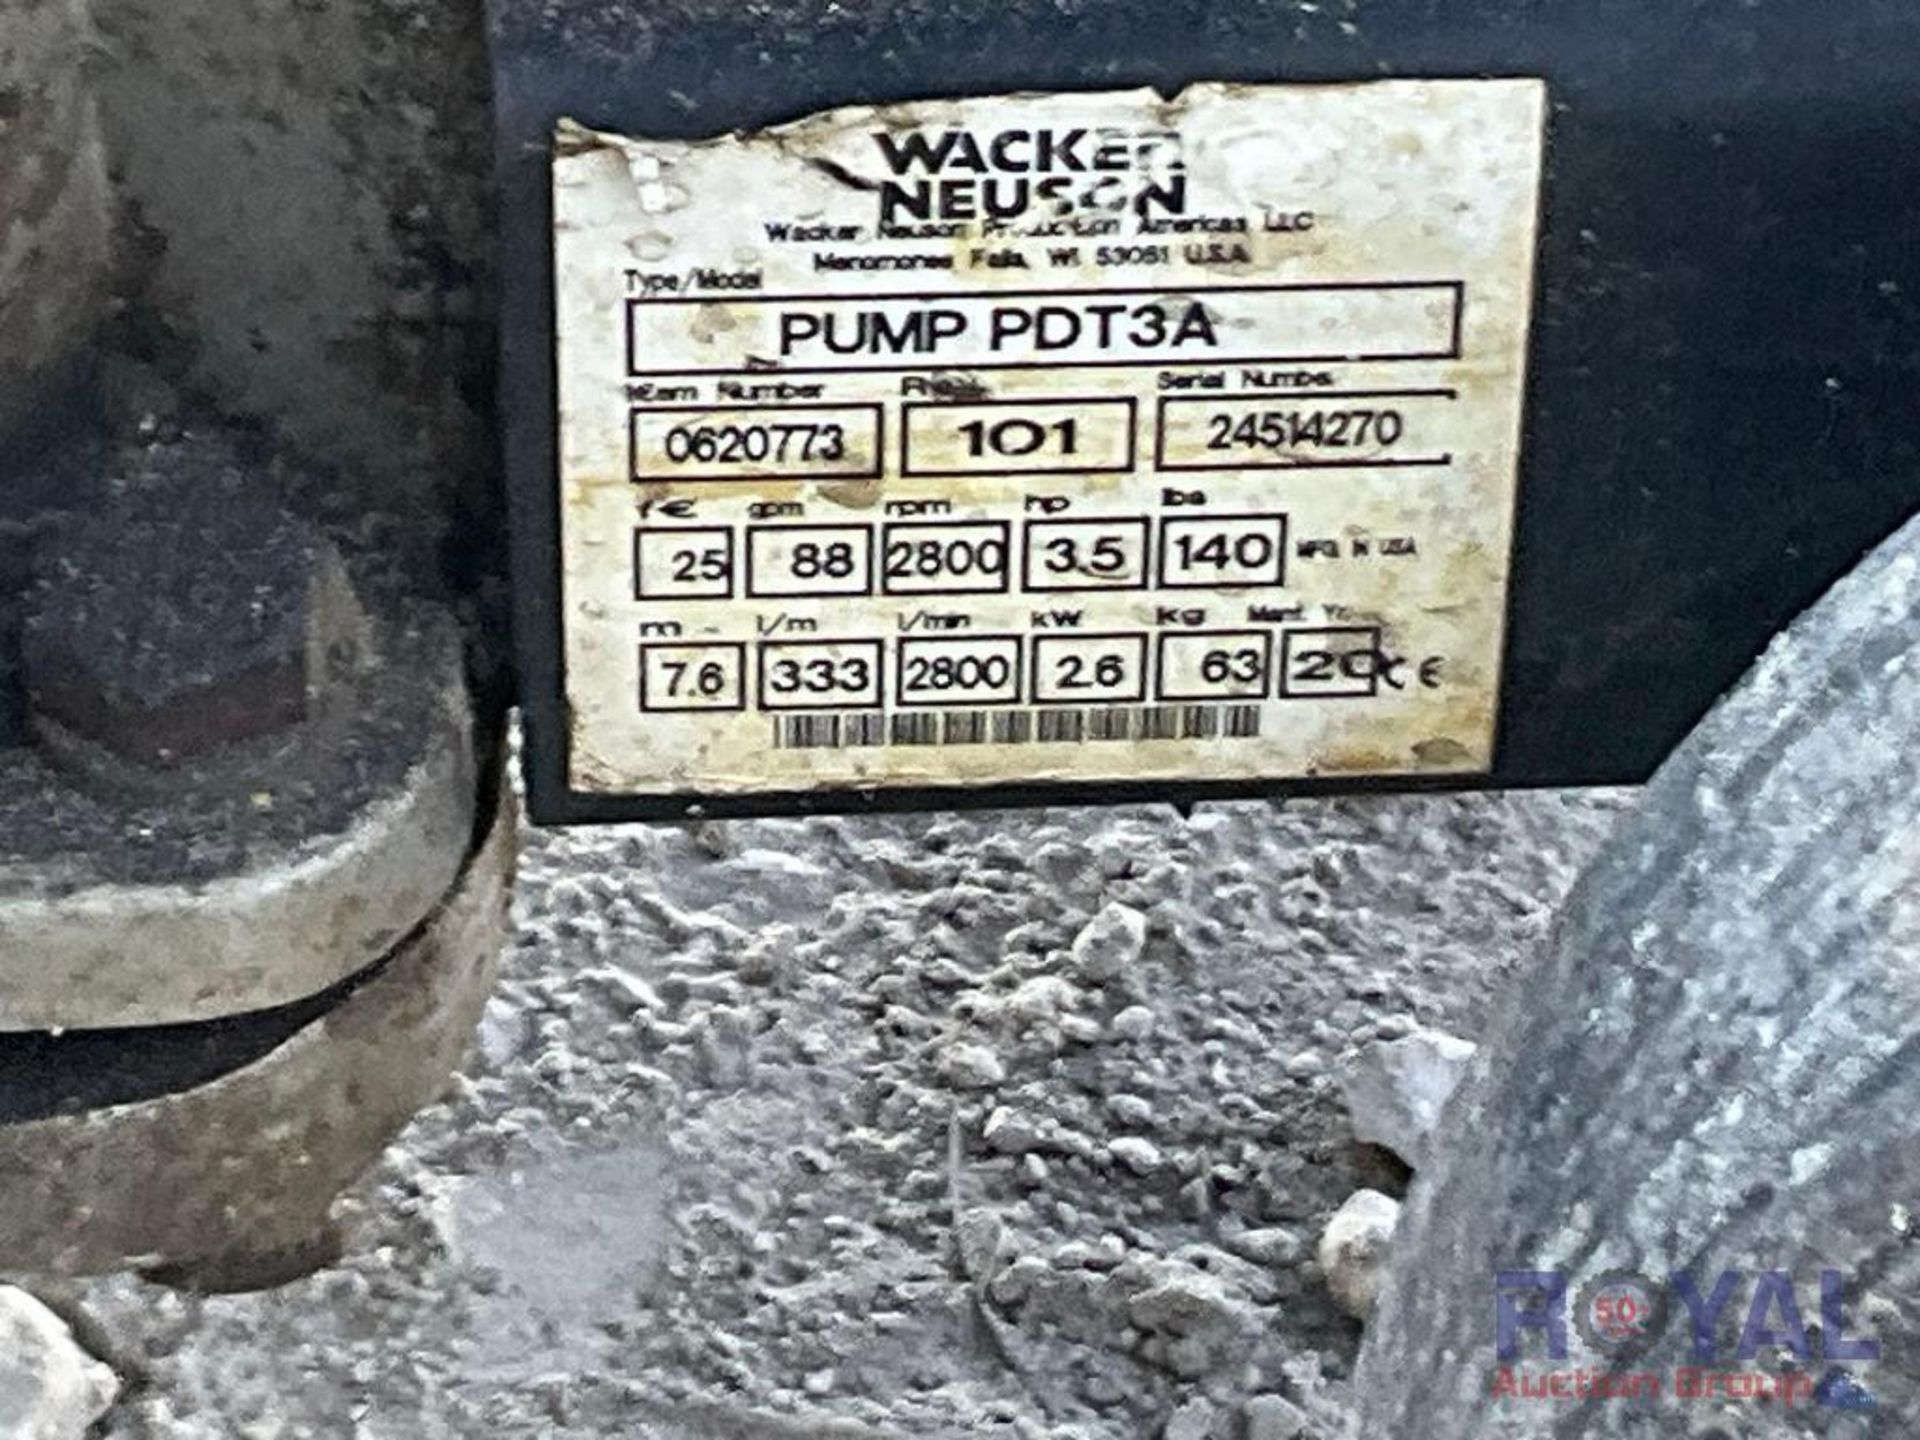 2020 Whacker Newson PDT3A 3in Diaphragm Pump - Image 5 of 5